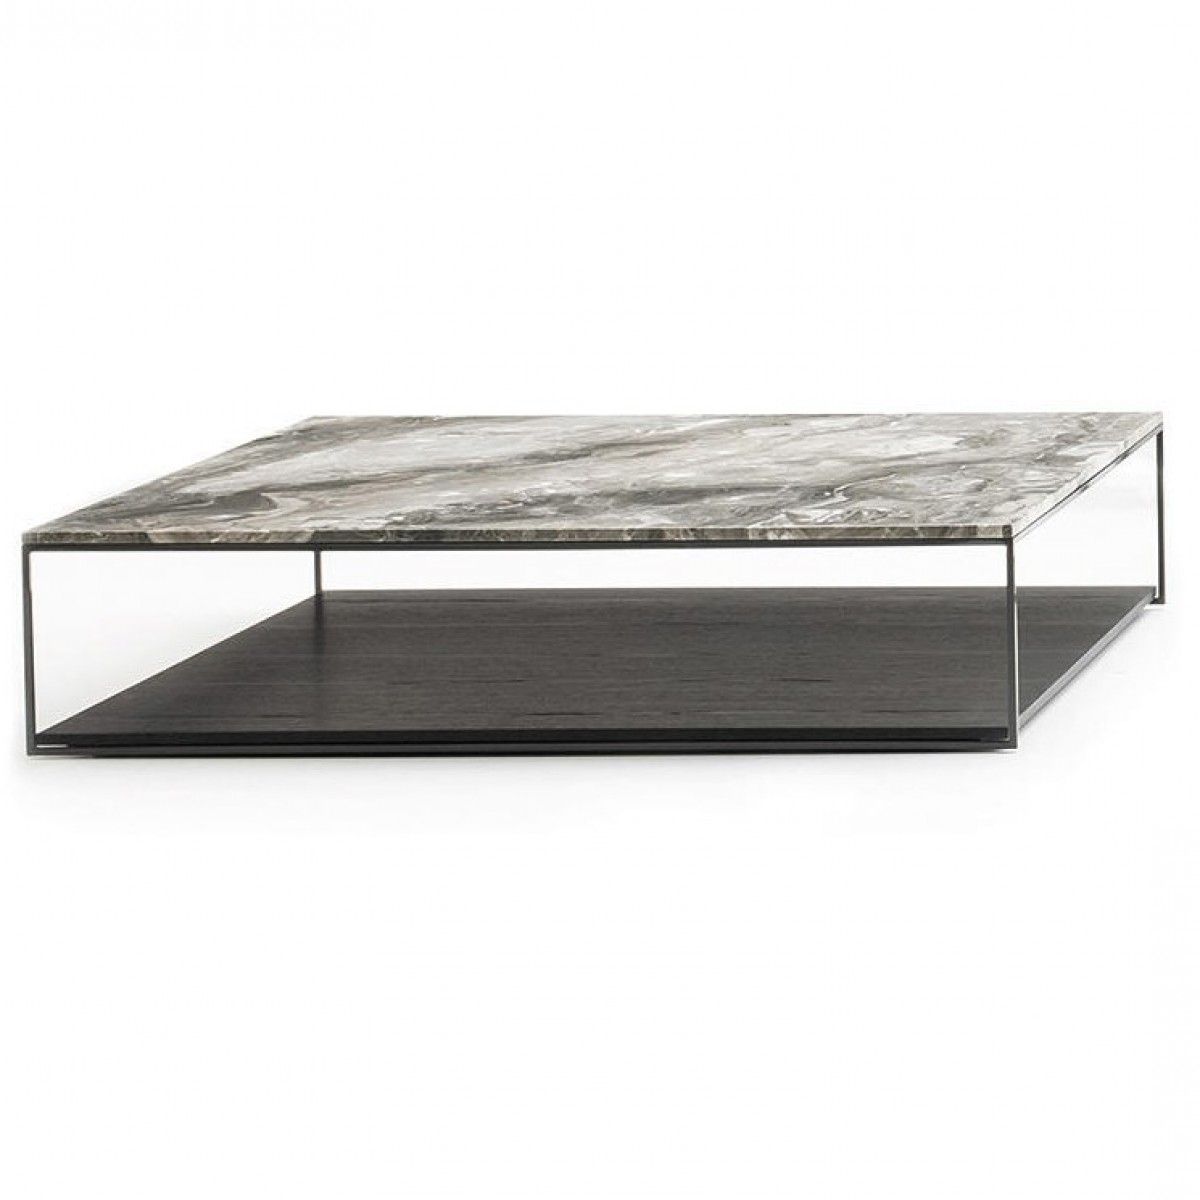 Liam Coffee Table – Square | Minotti | Chanintr For Liam Round Plaster Coffee Tables (Gallery 18 of 20)